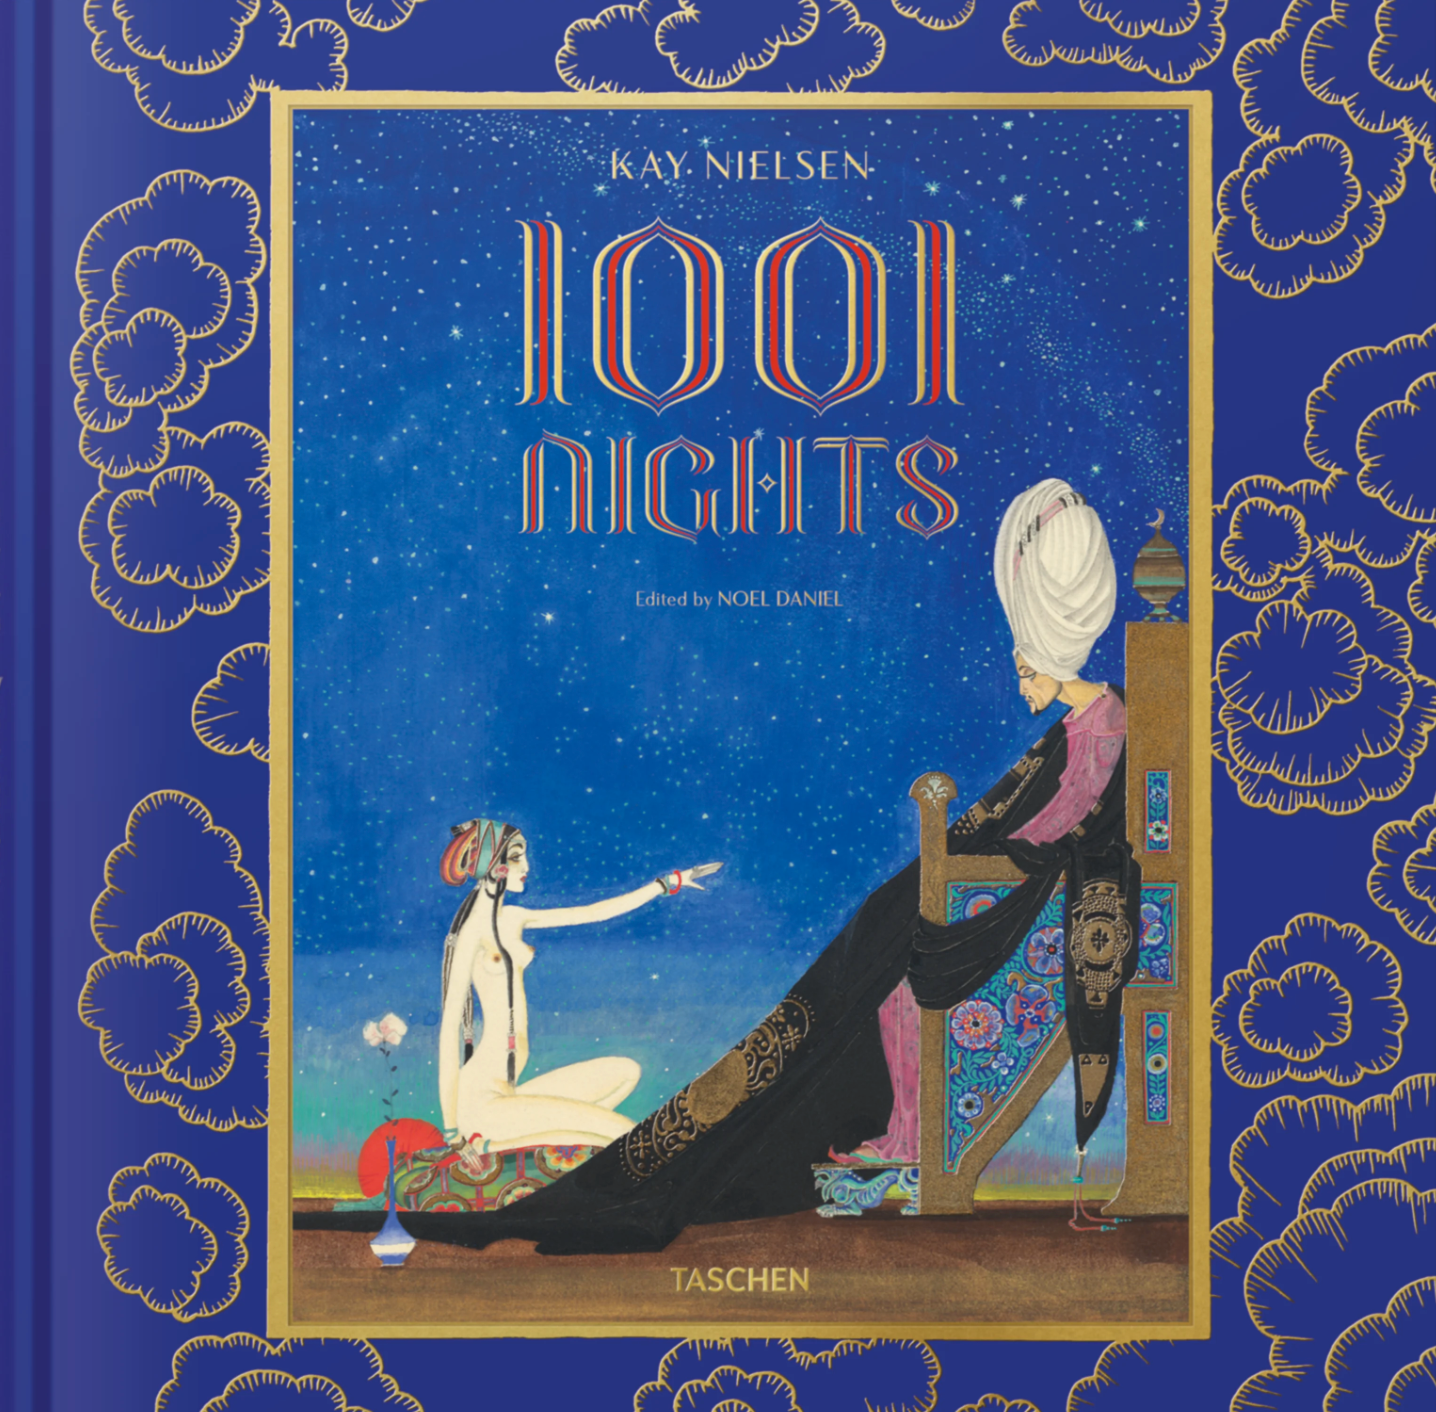 Kay Nielsen’s A Thousand and One Nights